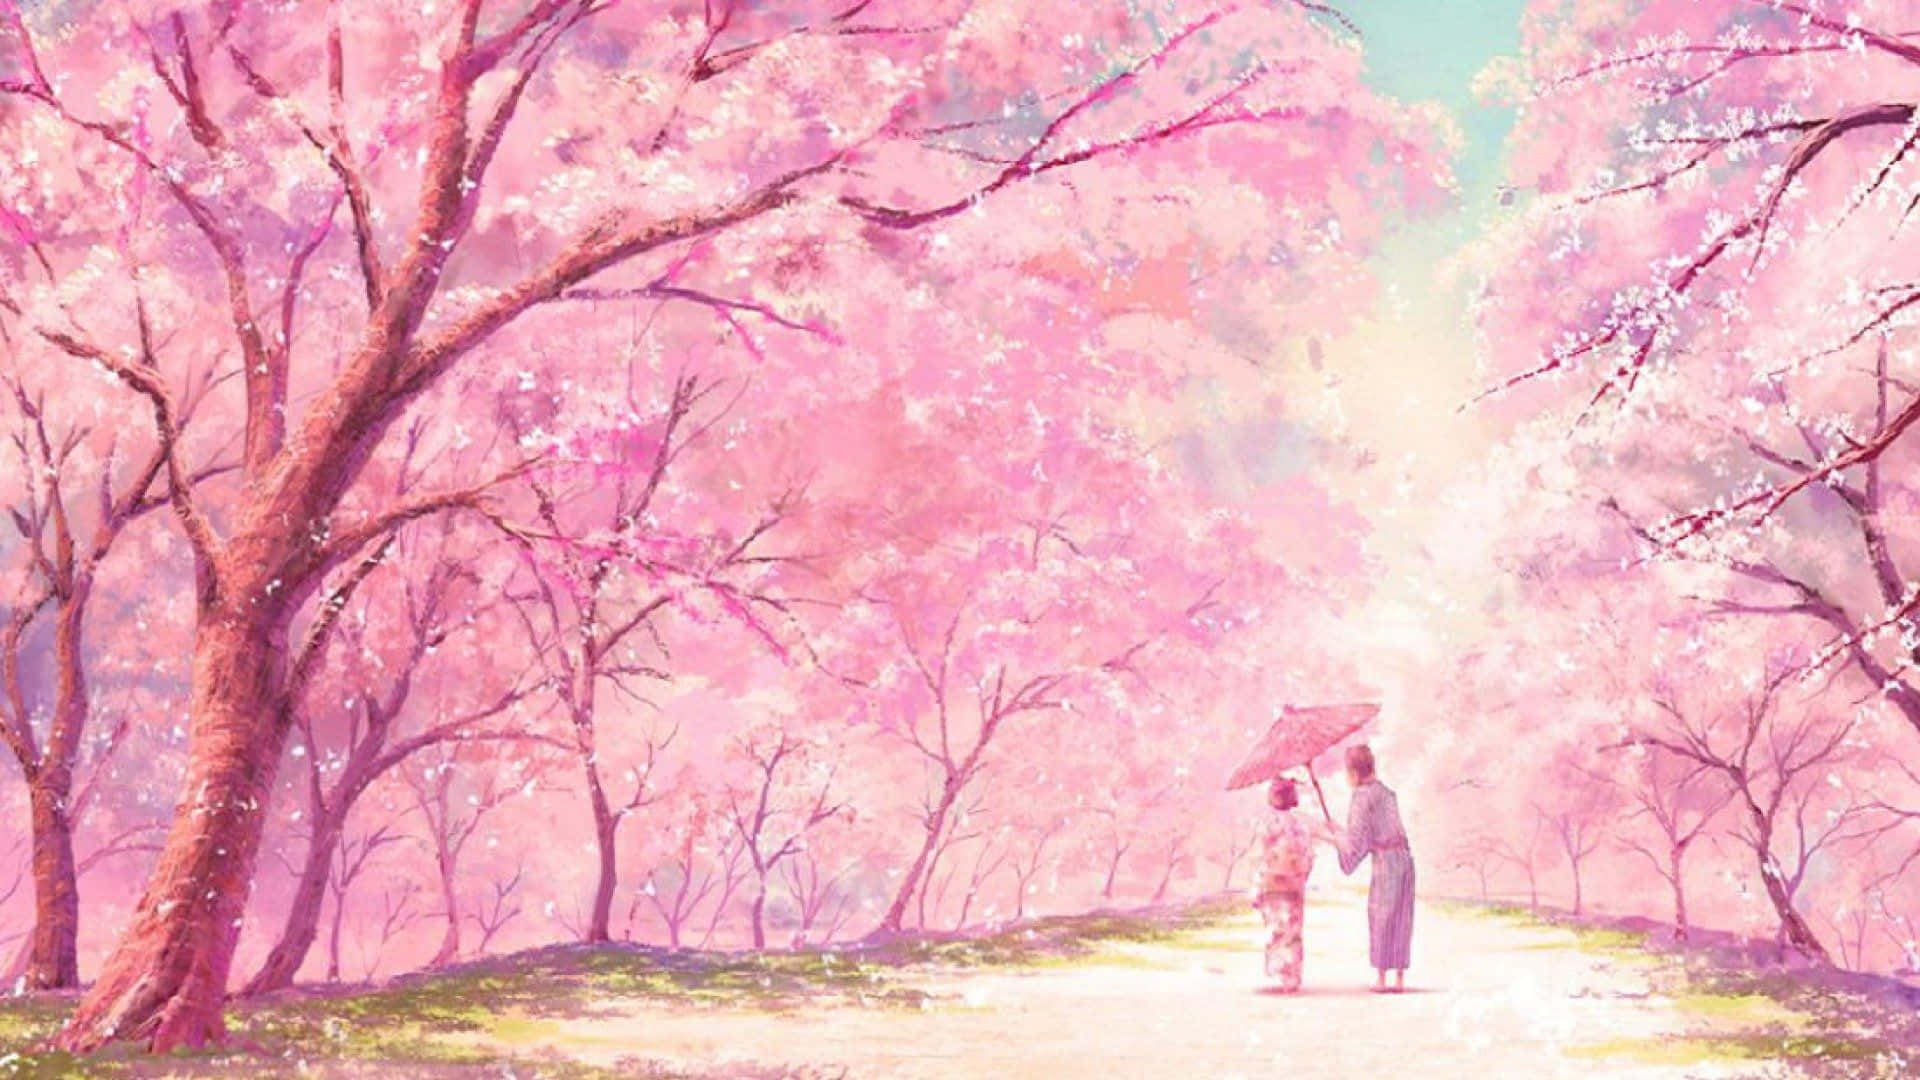 Download Pastel Aesthetic Anime Path With Cherry Blossom Trees Wallpaper